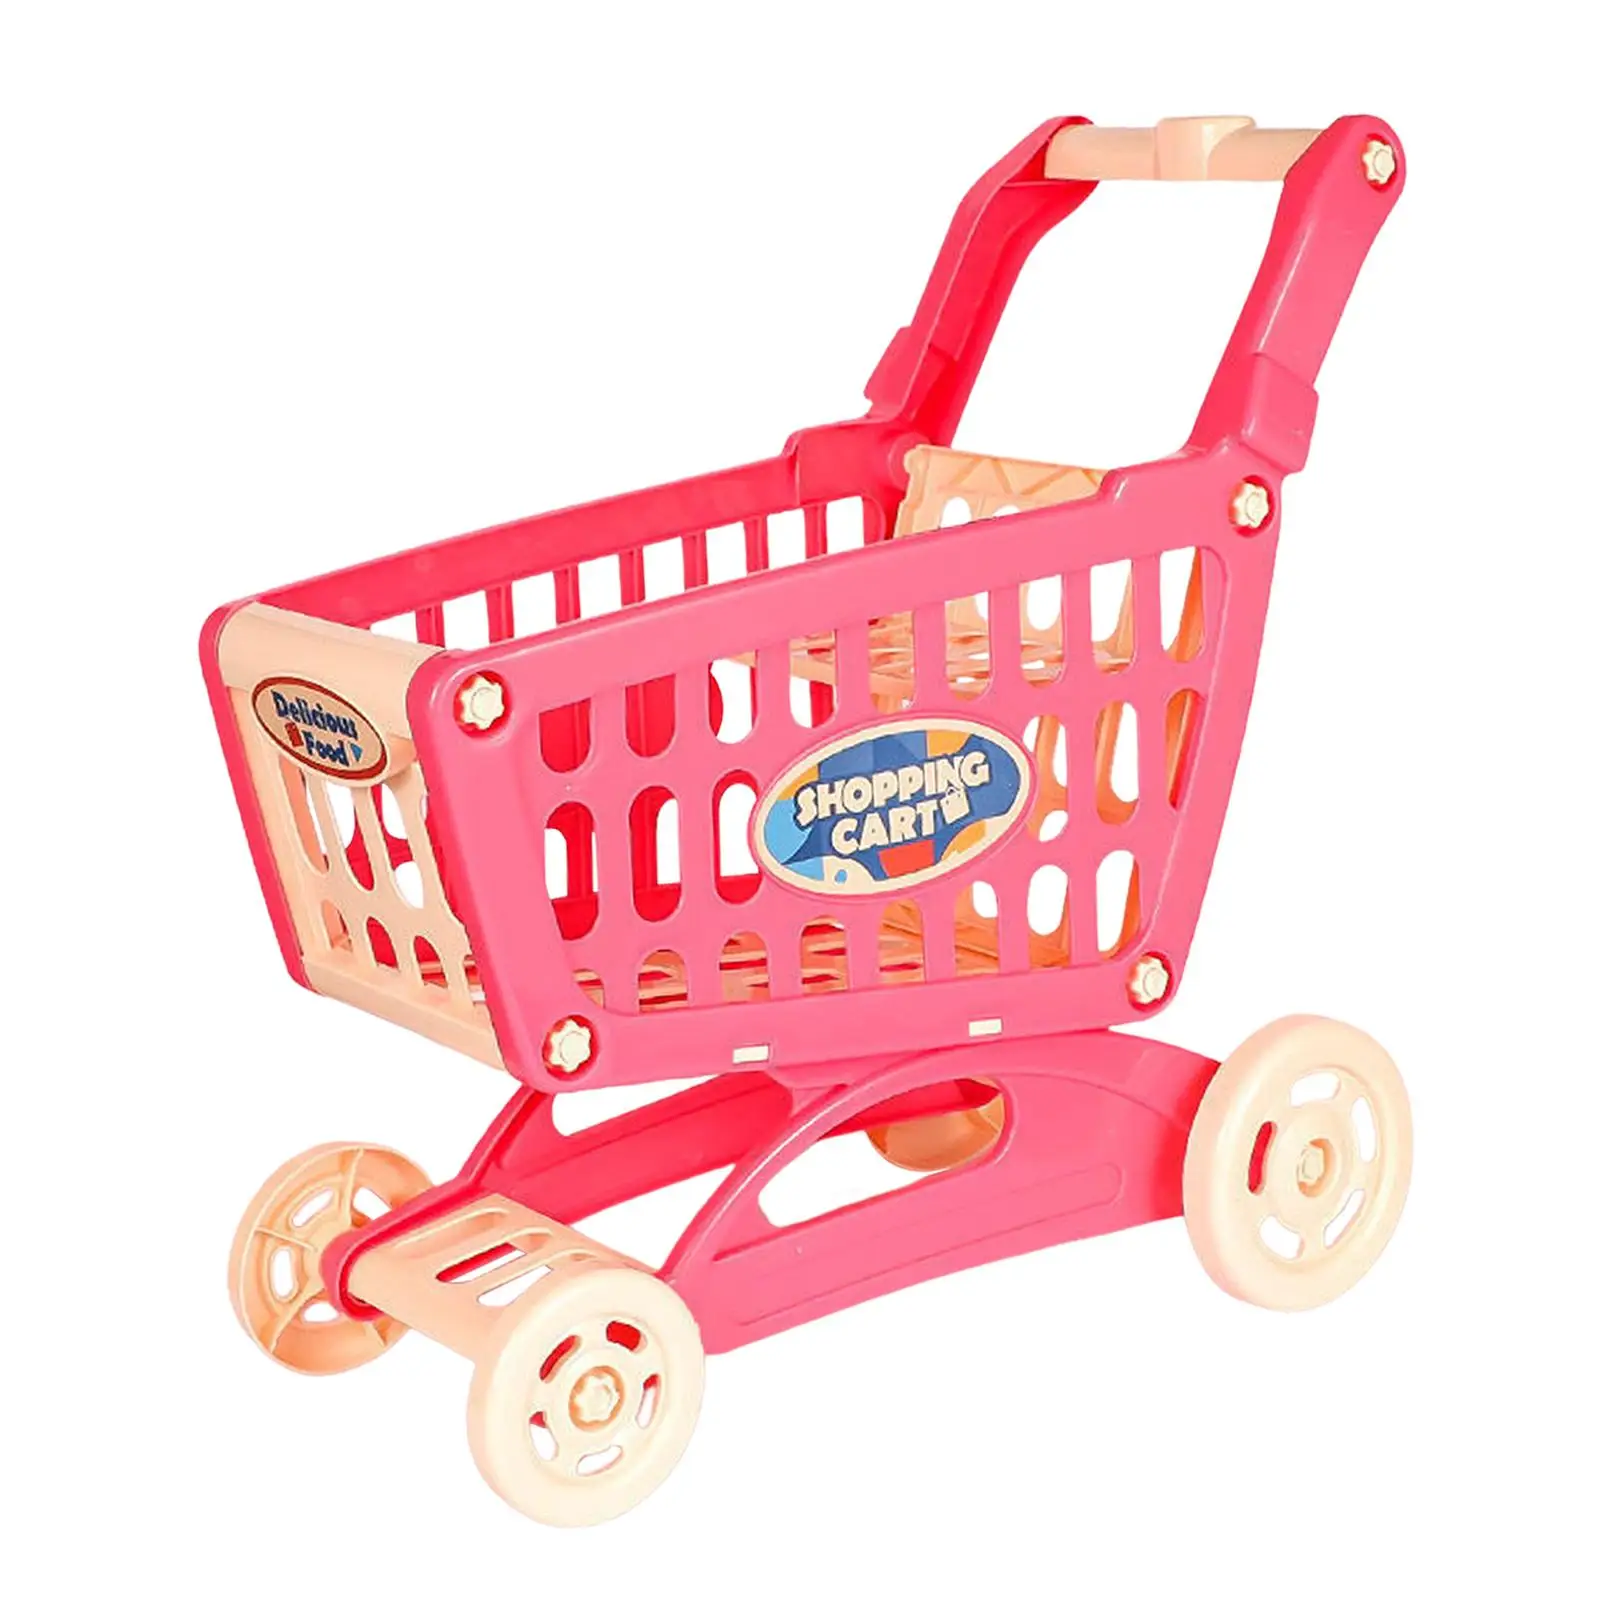 Funny Shopping Trolley Toy Smooth Wheels for Girls and Boys Ages 3 and up